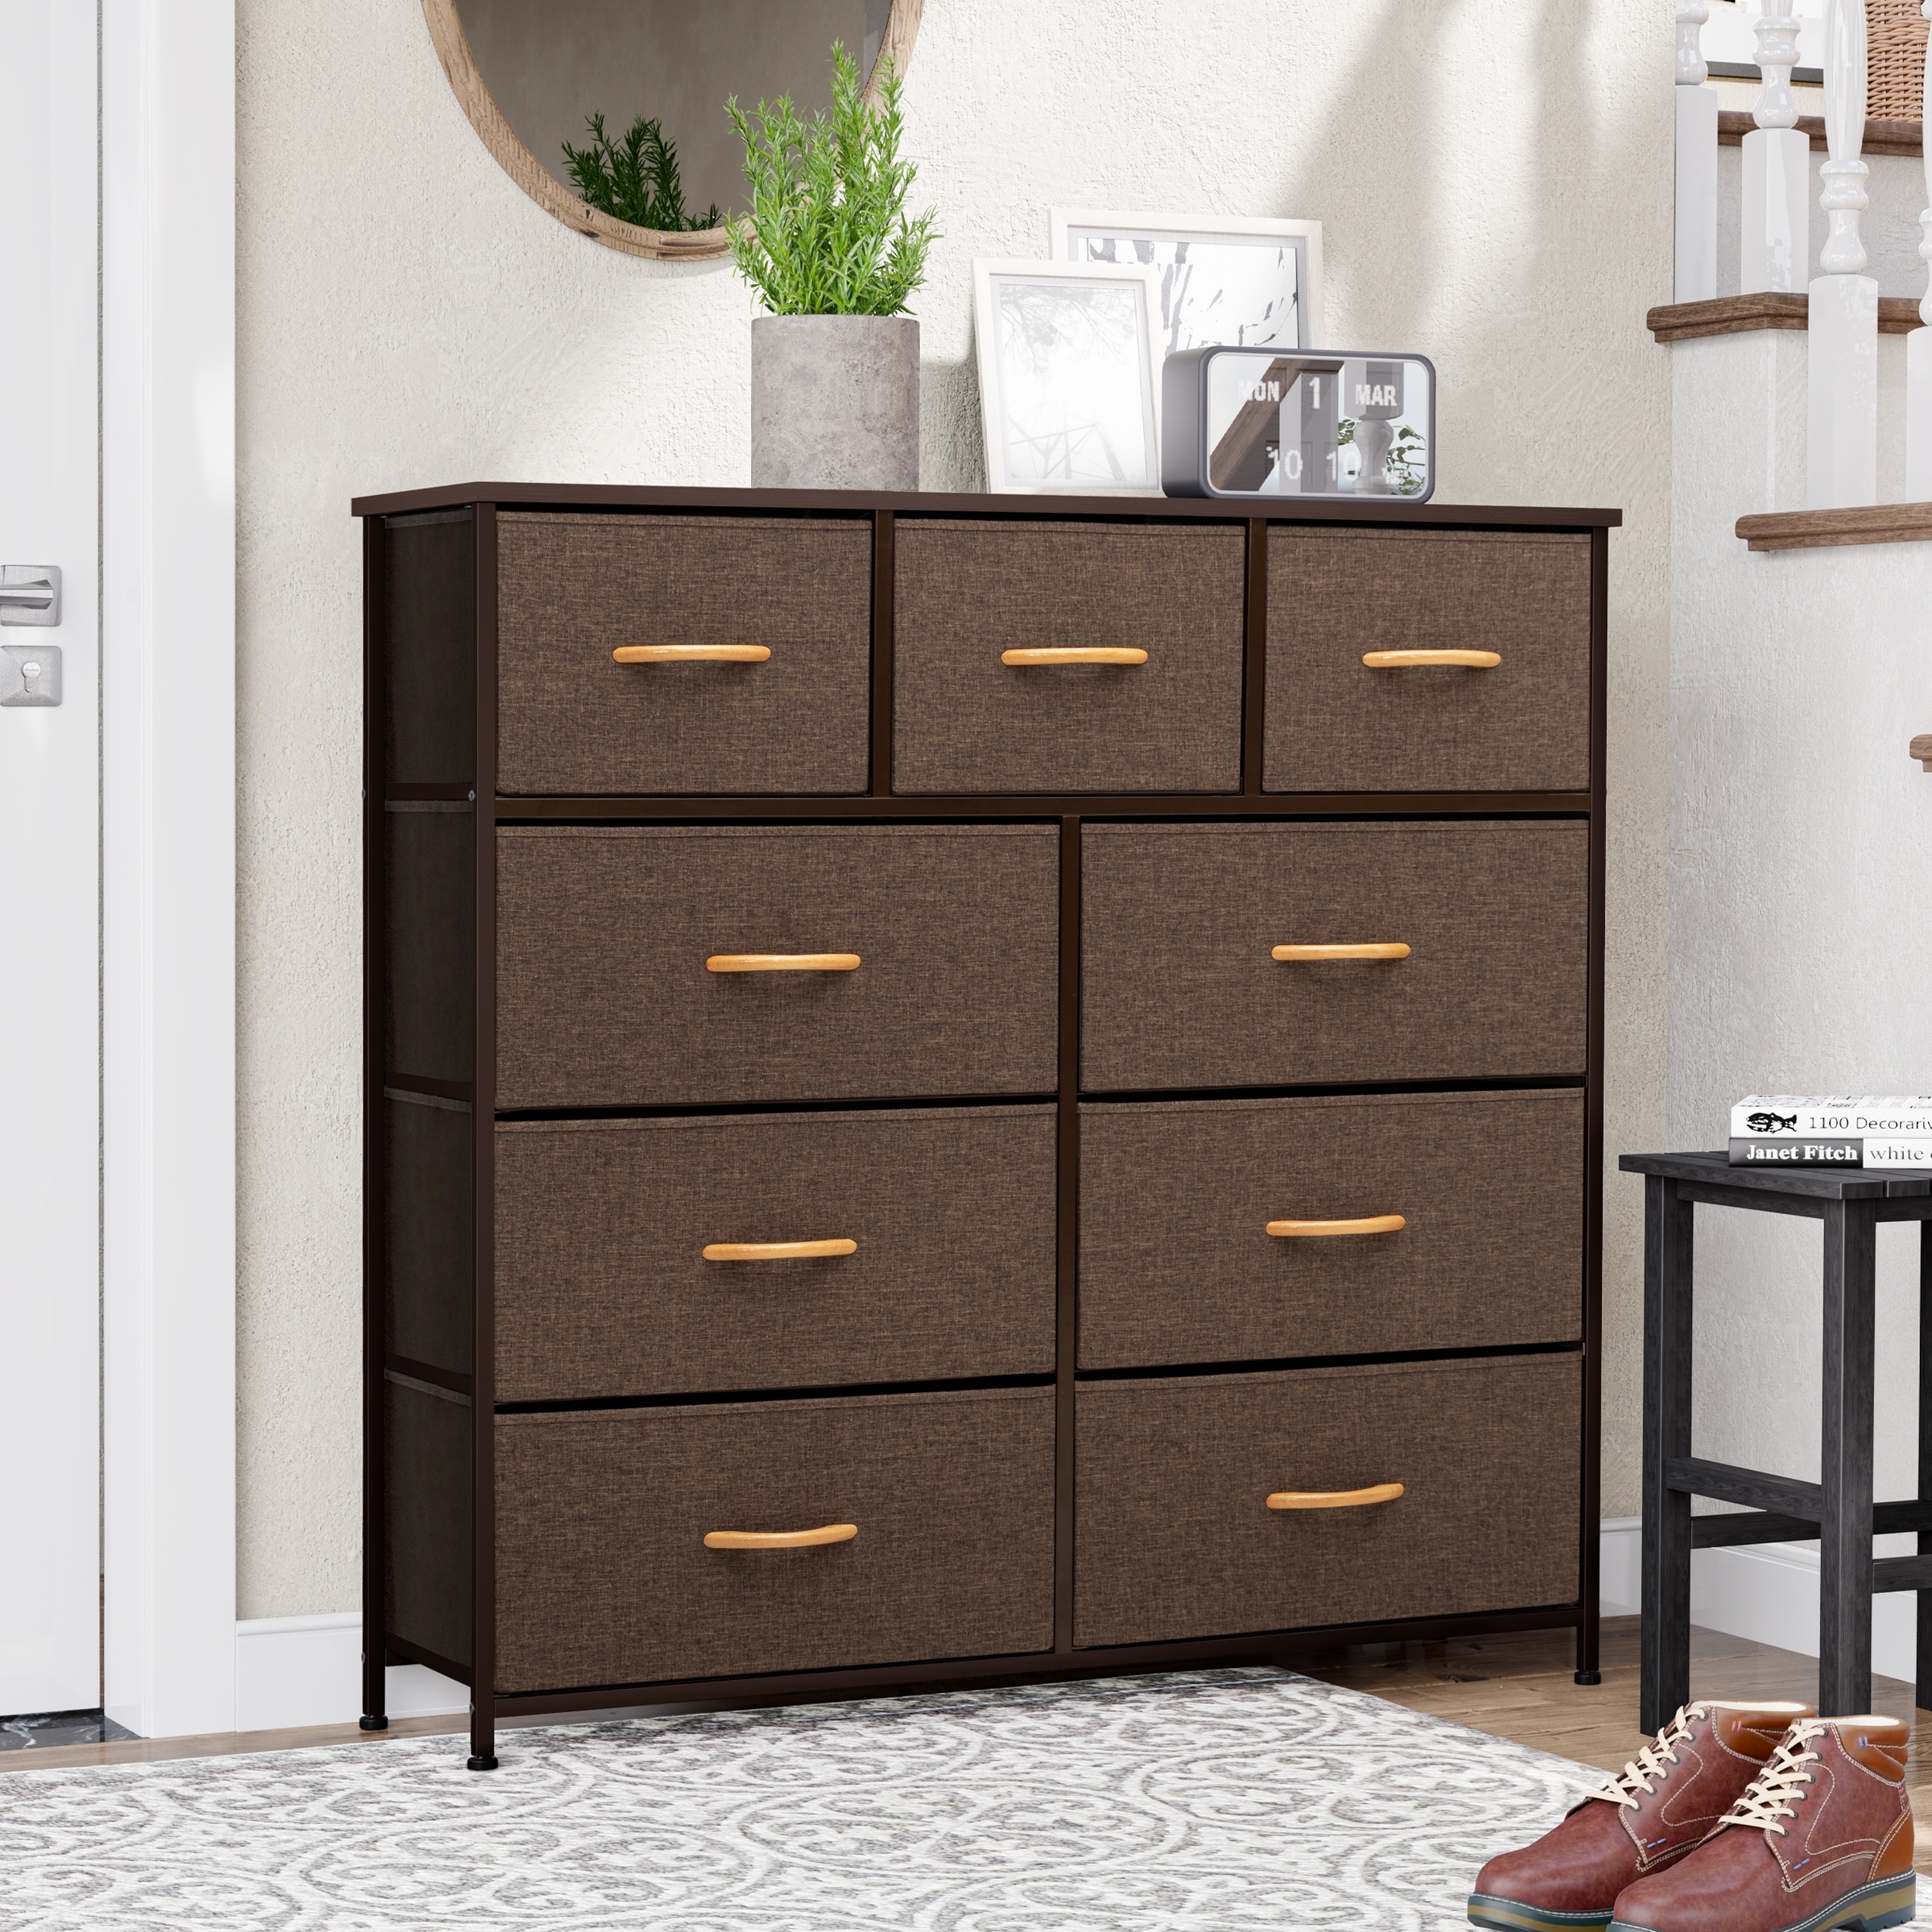 Heart Of The Home Black 9 Drawer Storage Unit 